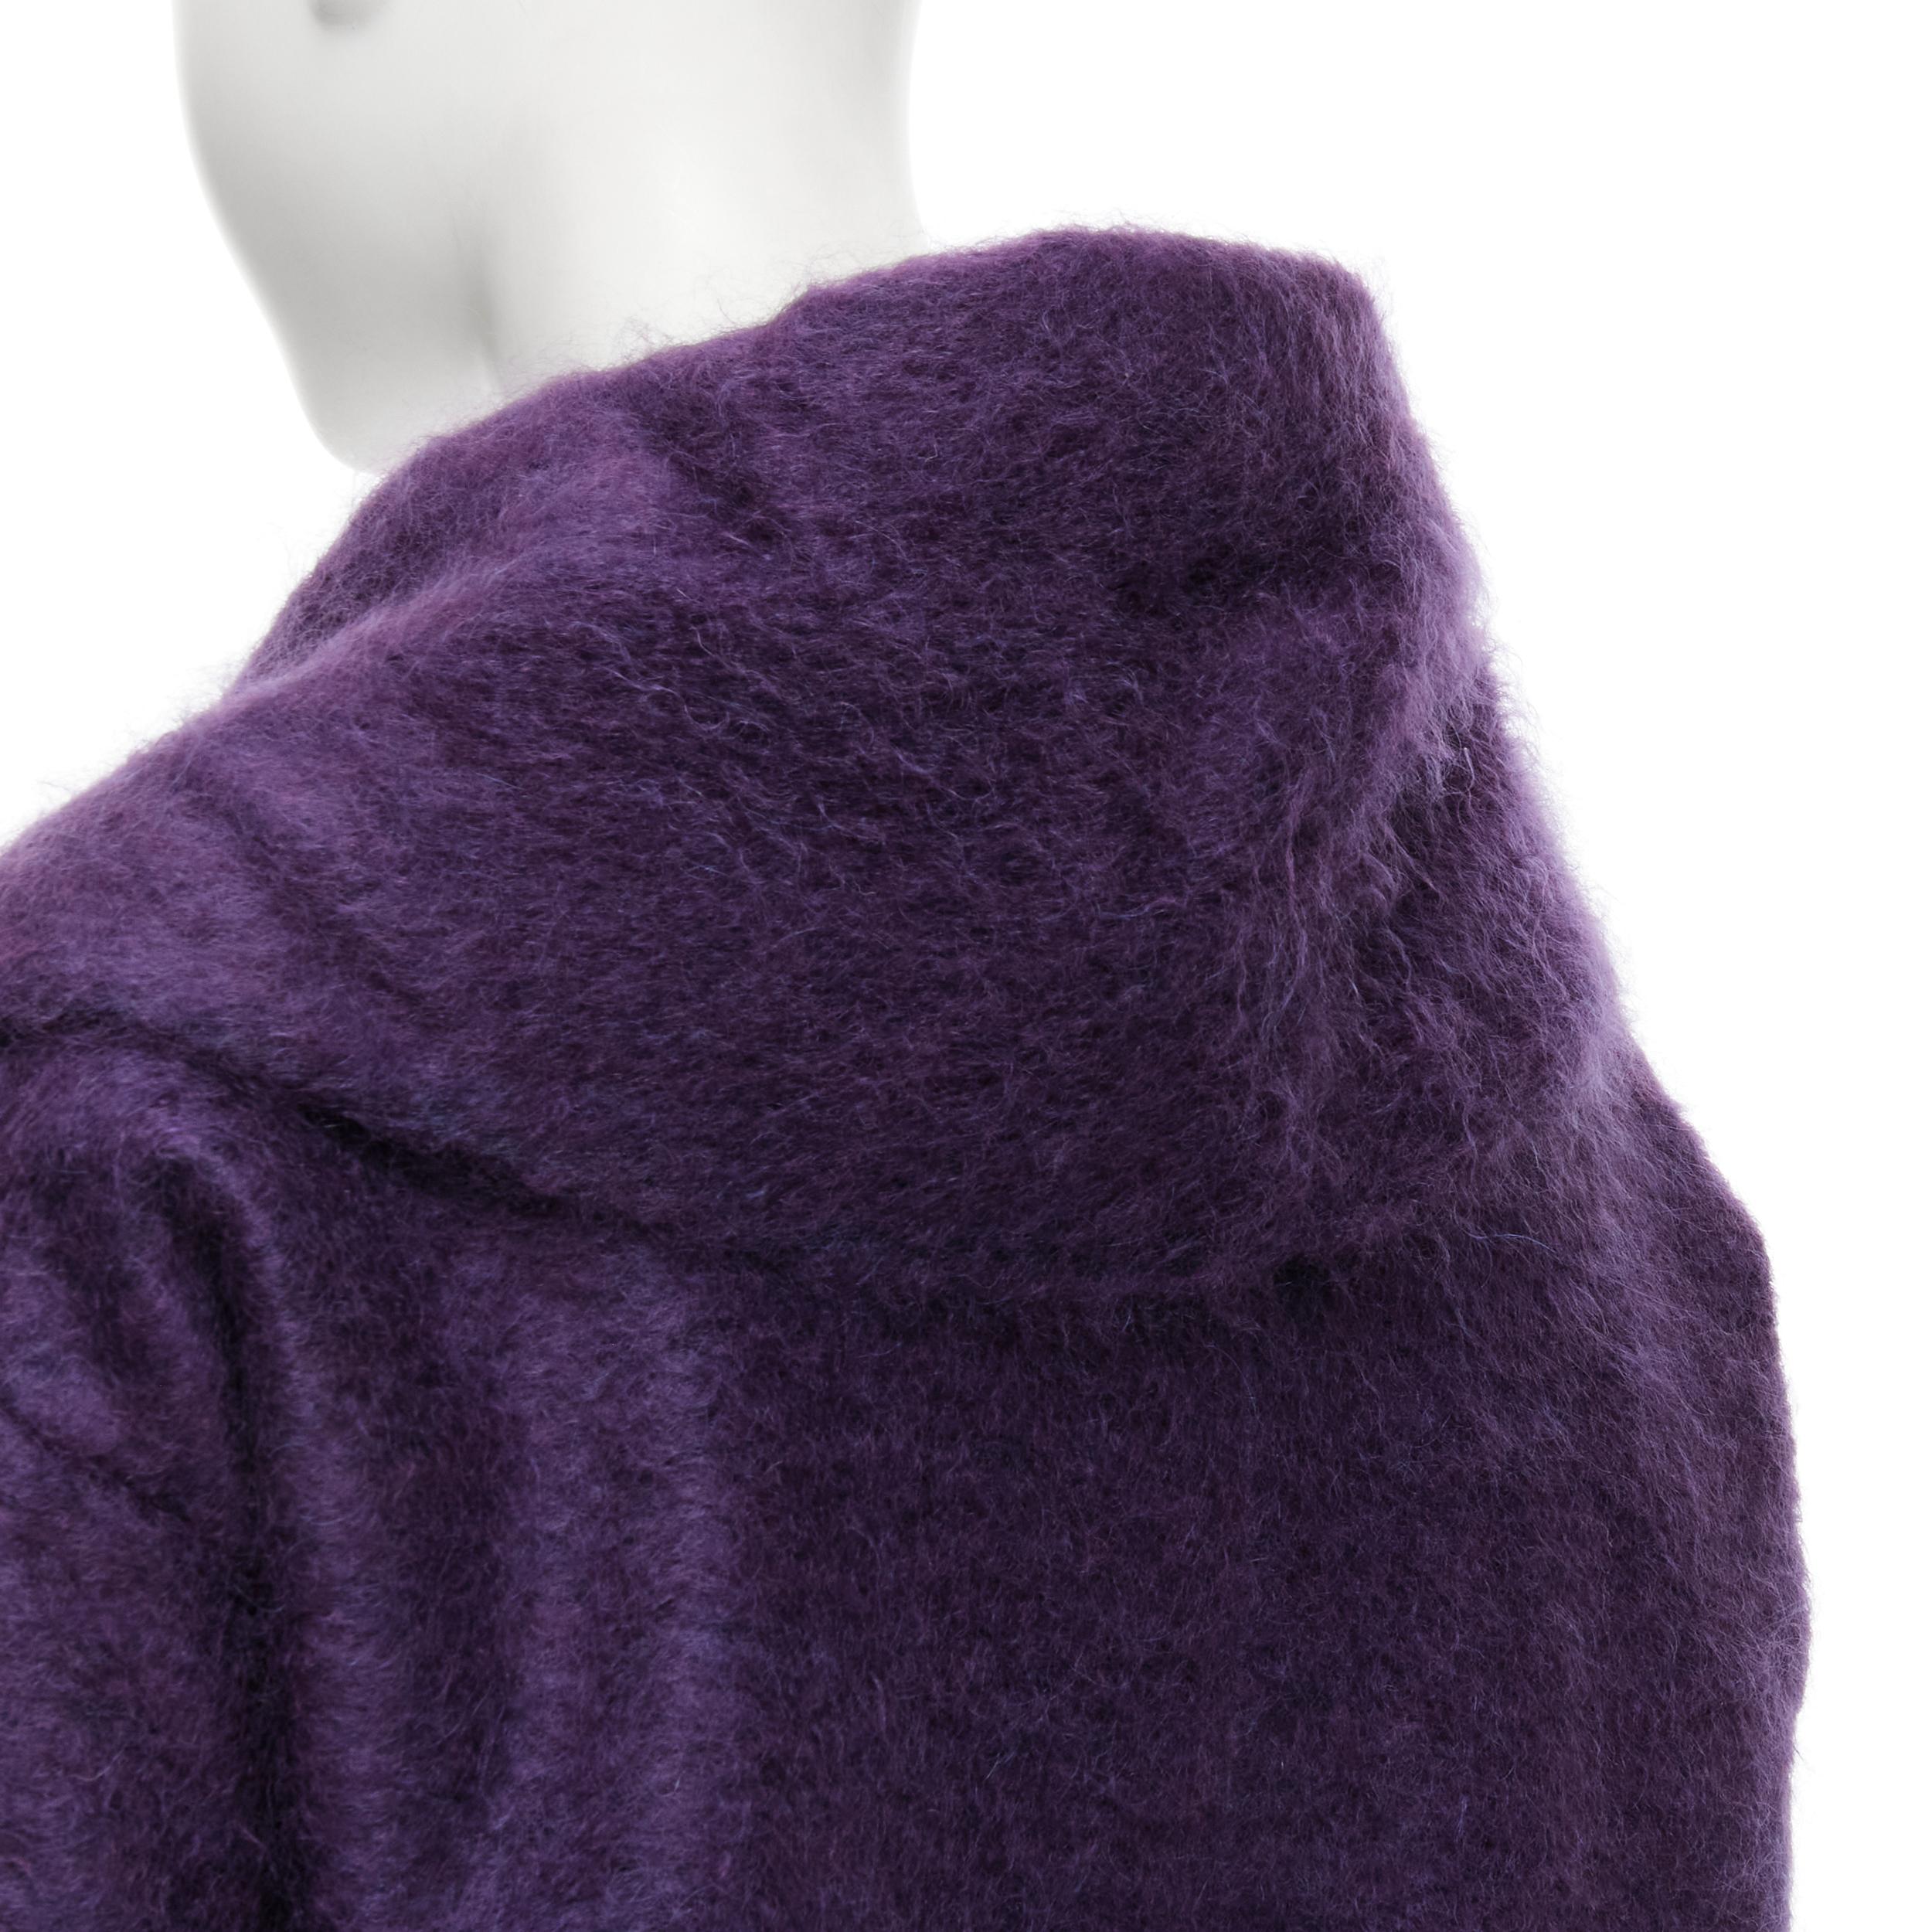 ROMEO GIGLI JOYCE purple fuzzy wool blend double berasted cocoon coat FR36 S Reference: CELG/A00054 
Brand: Romeo Gigli 
Material: Wool 
Color: Purple 
Pattern: Solid 
Closure: Button 
Extra Detail: Dual slit front pockets. 
Made in: Italy